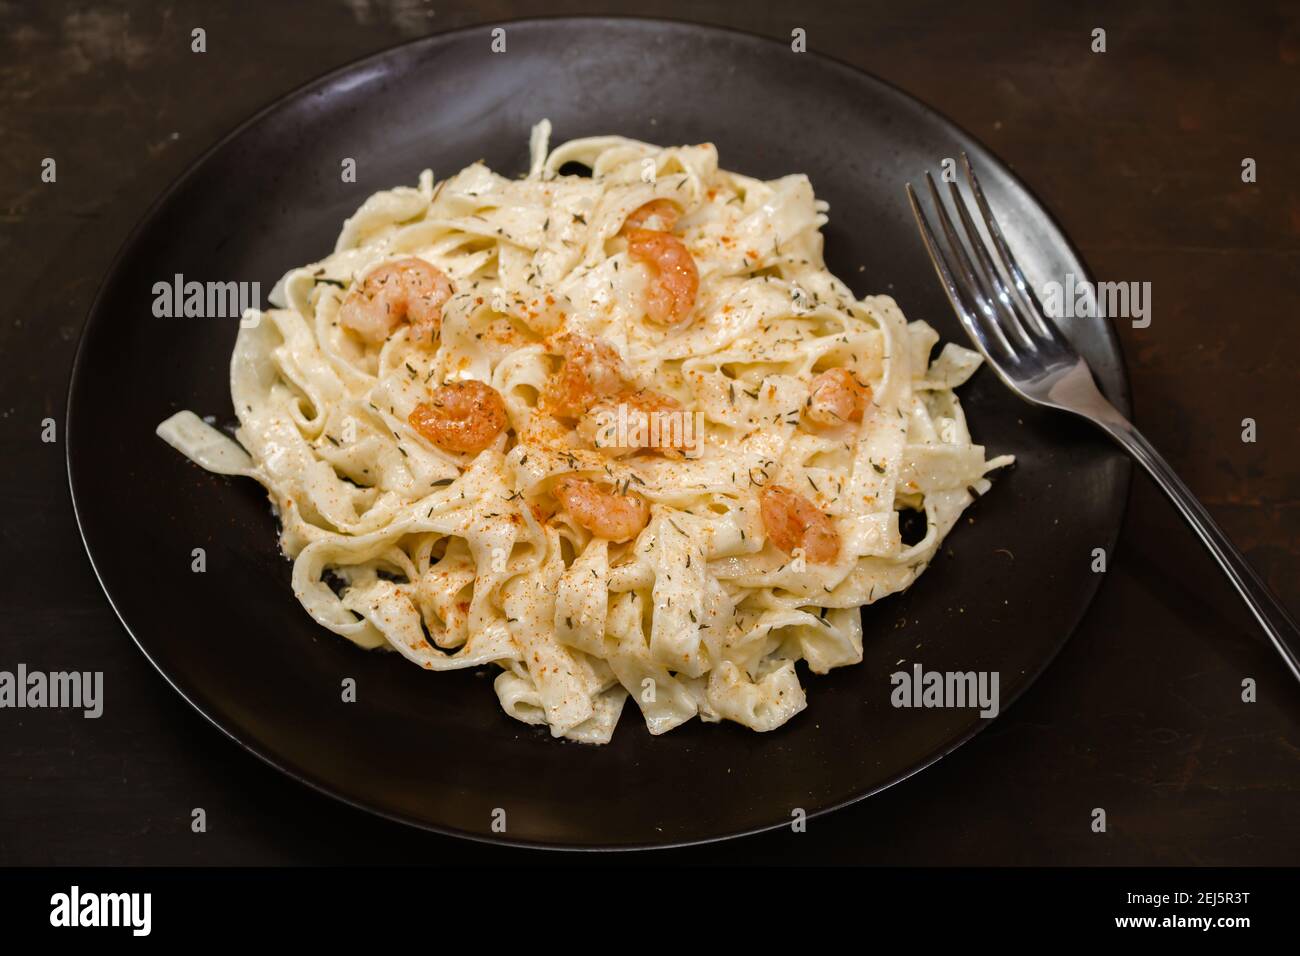 Delicious Italian pasta. Fetuccini with shrimp and herb sauce on black plate. Stock Photo